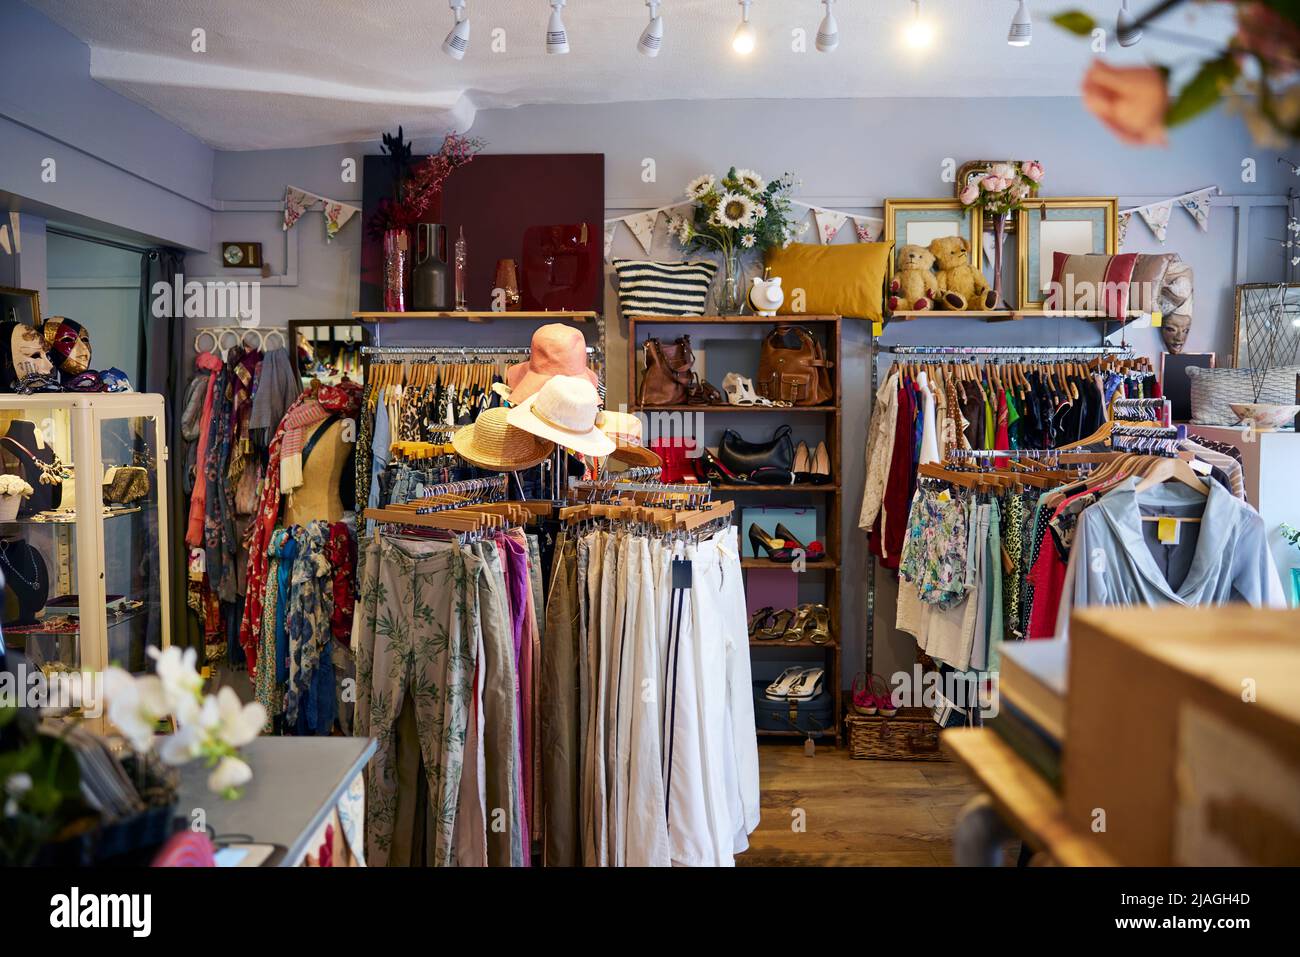 Interior Of Charity Shop Or Thrift Store Selling Used And Sustainable Clothing And Household Goods Stock Photo